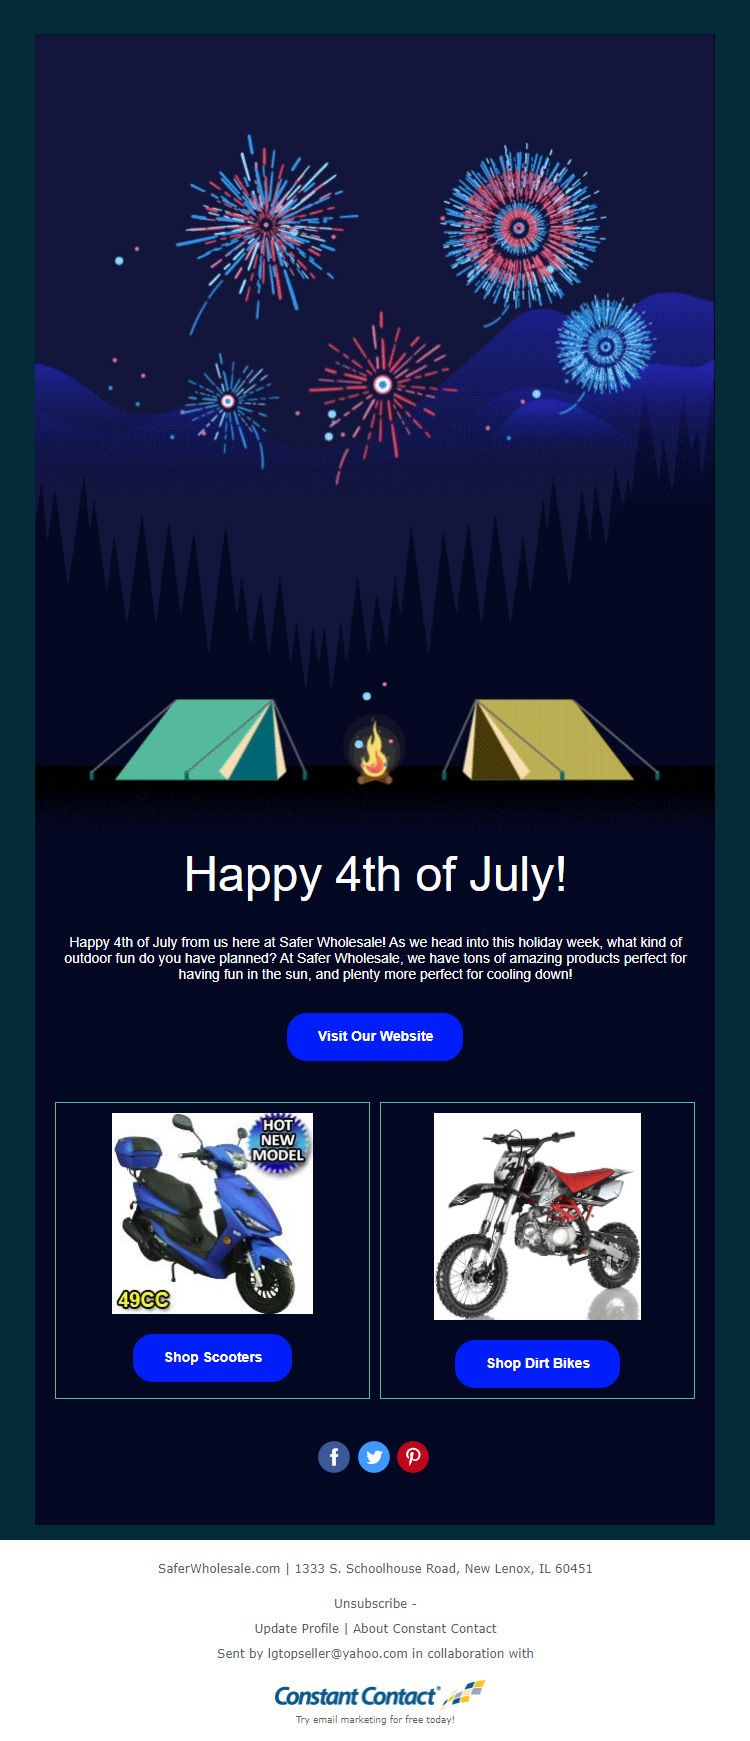 "
Saferwholesale.com  Independence Day Email Template"